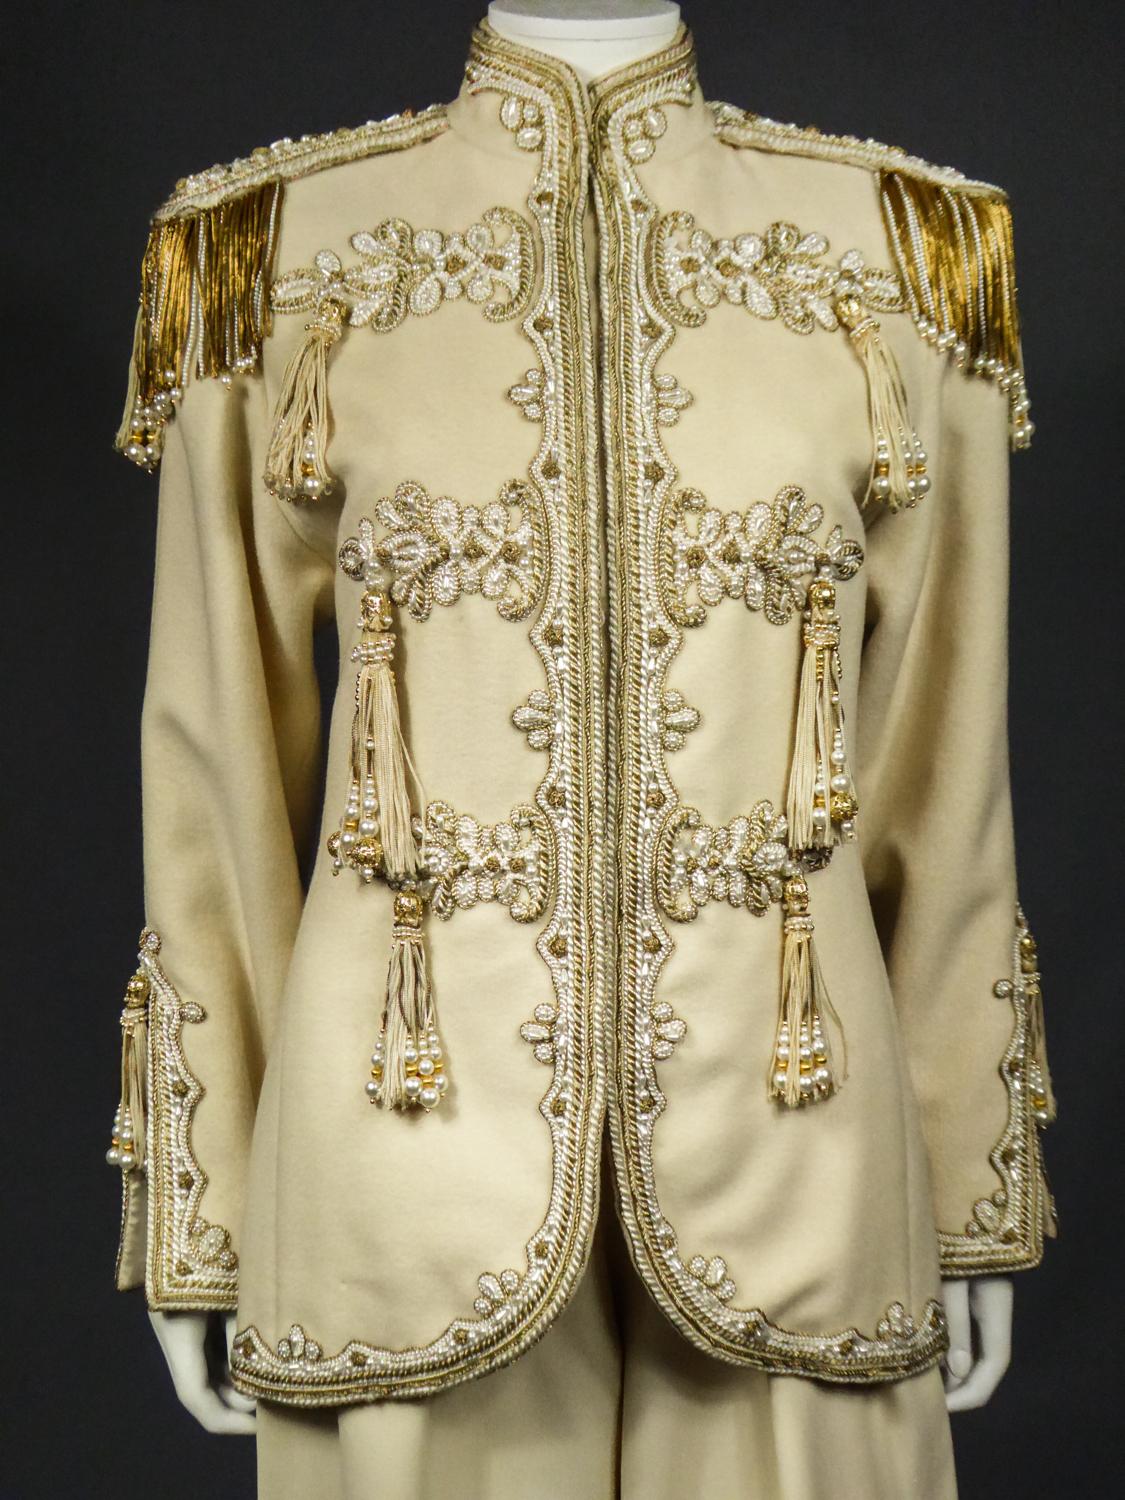 Circa 1990/1995
France

A military-inspired trouser suit in beige wool by Jean-Louis Scherrer under the direction of Stephane Rolland from the 1990s. Officer jacket with high collar and fringed epaulettes richly embroidered with pearly pearls and